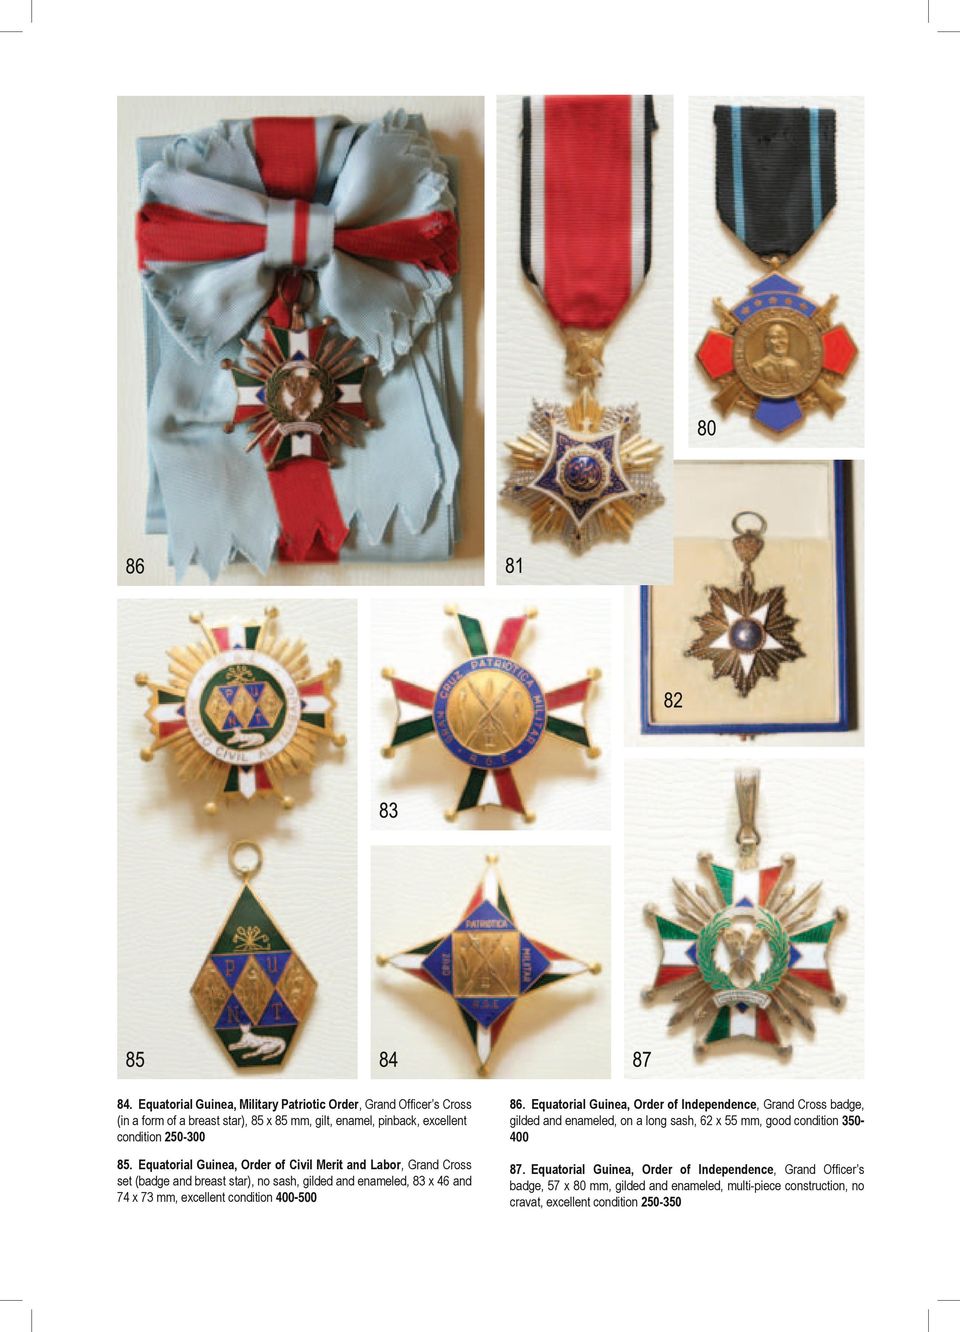 Equatorial Guinea, Order of Civil Merit and Labor, Grand Cross set (badge and breast star), no sash, gilded and enameled, 83 x 46 and 74 x 73 mm, excellent